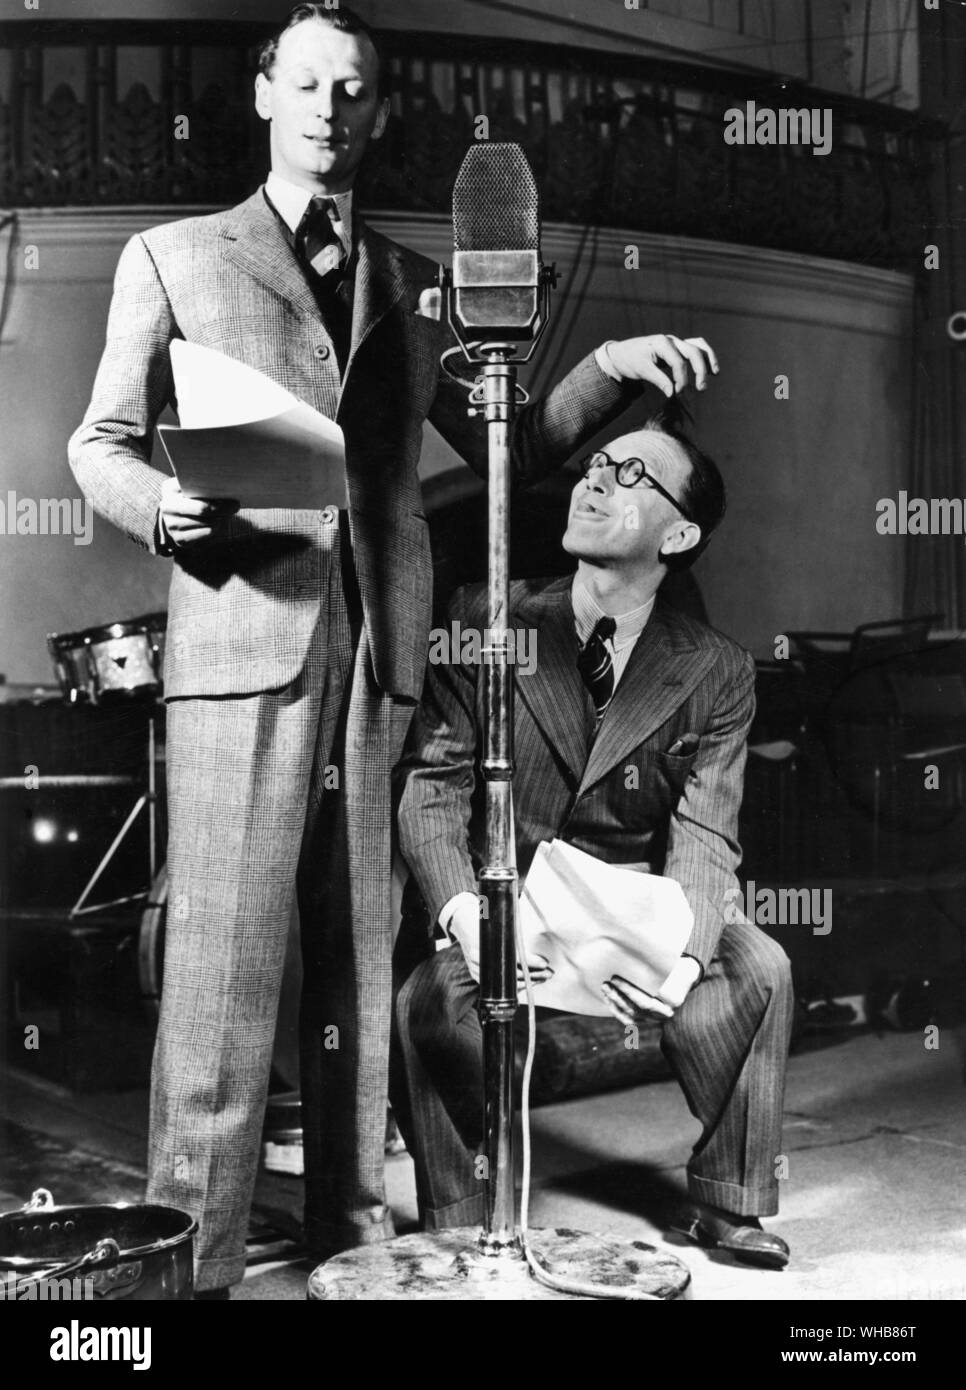 Arthur Askey (right) and Richard Murdoch recording a radio programme at Broadcasting House in London - 24th January 1949. Stock Photo